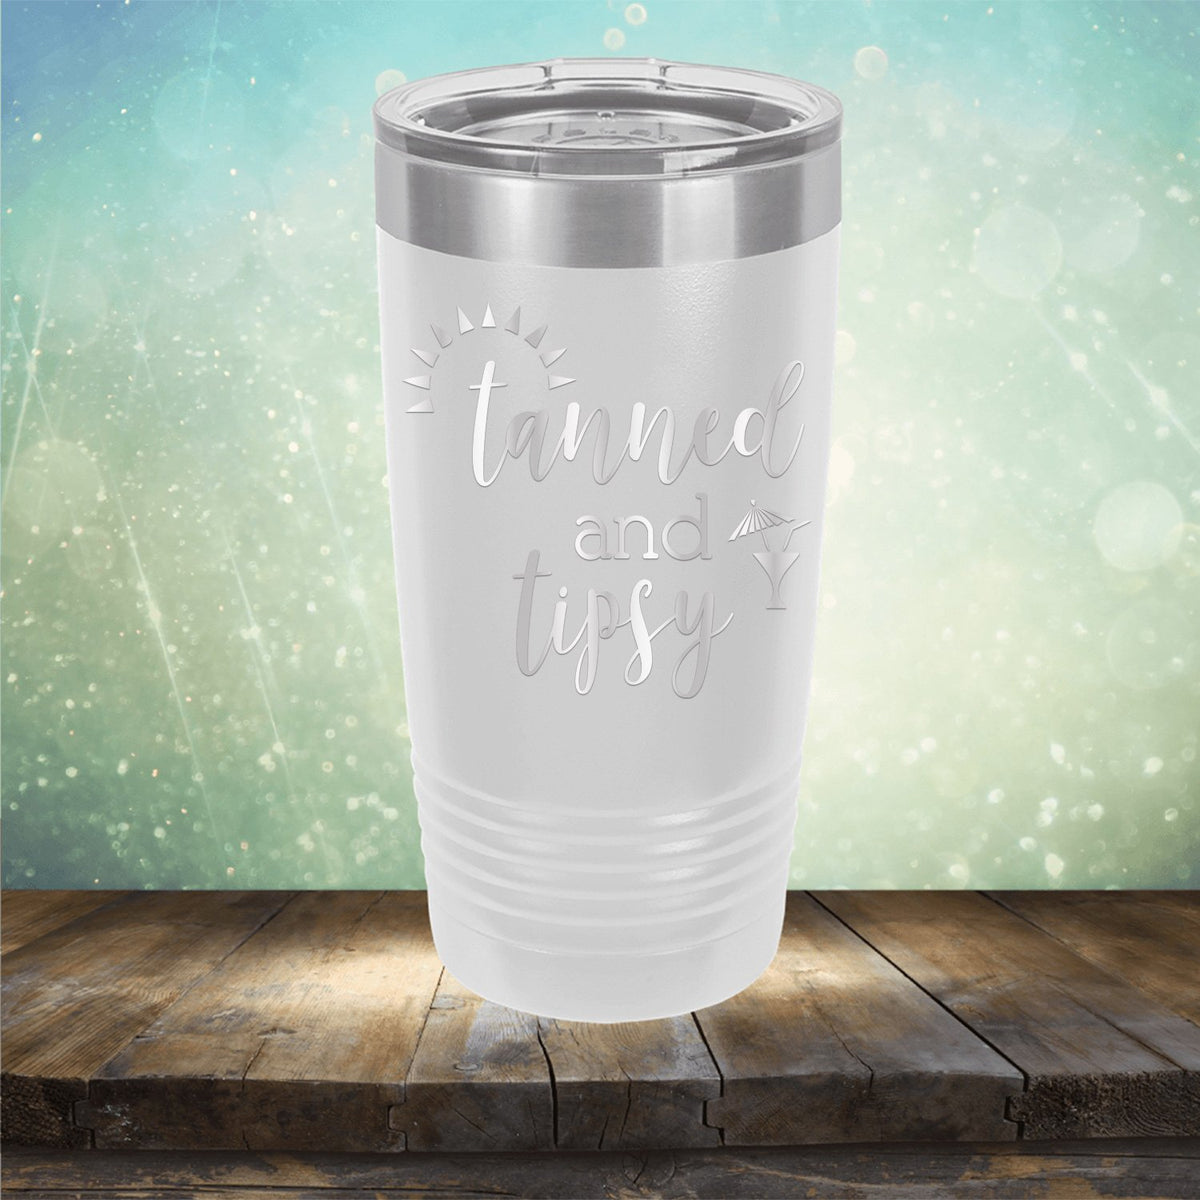 Tanned and Tipsy - Laser Etched Tumbler Mug